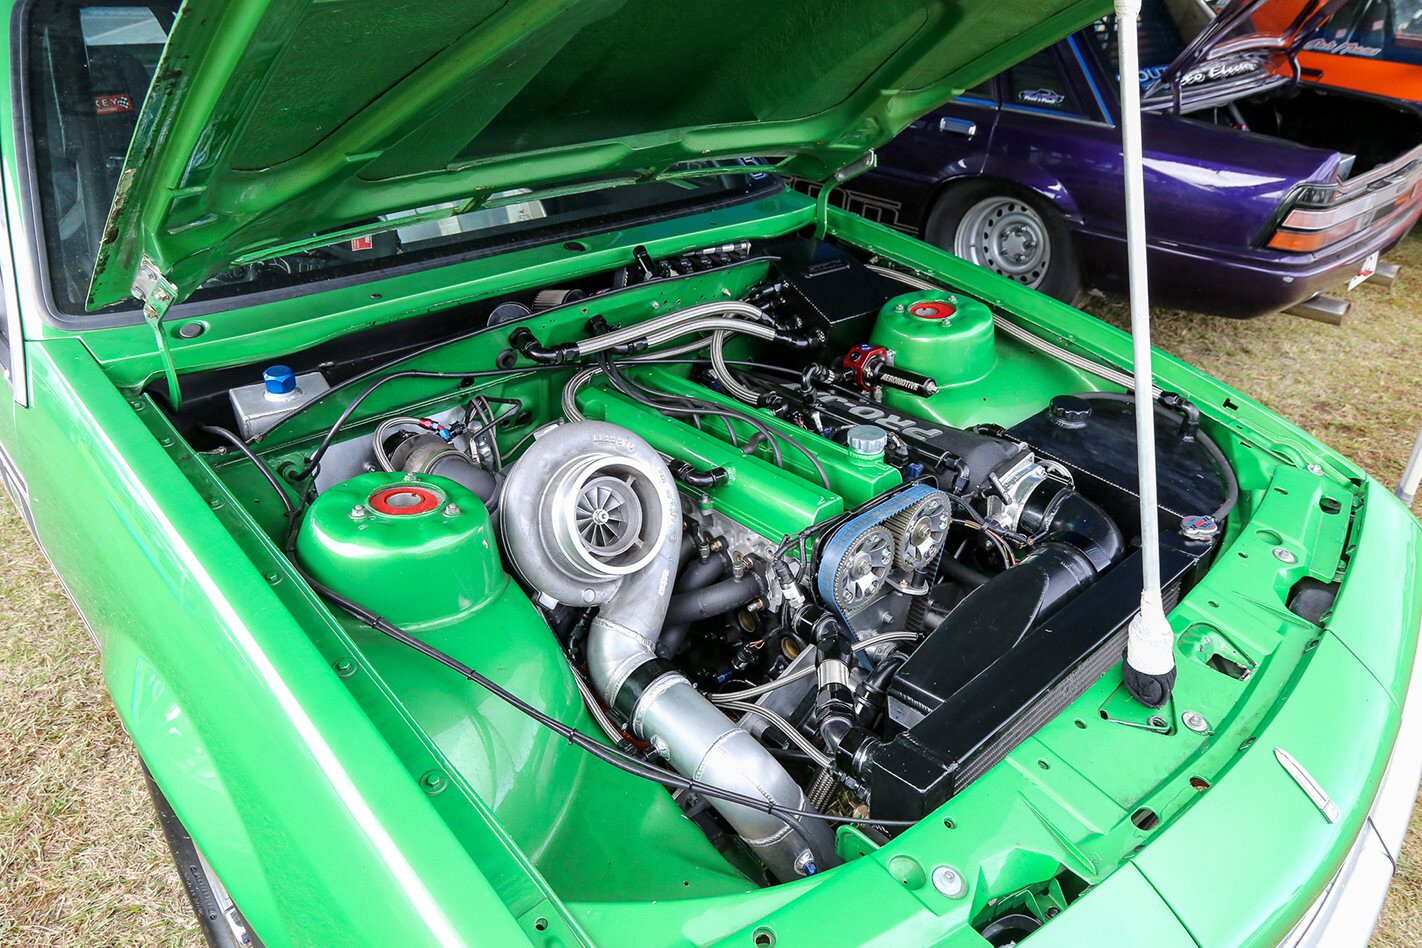 VIDEO: SCREAMING 2JZ-POWERED VL COMMODORE WAGON